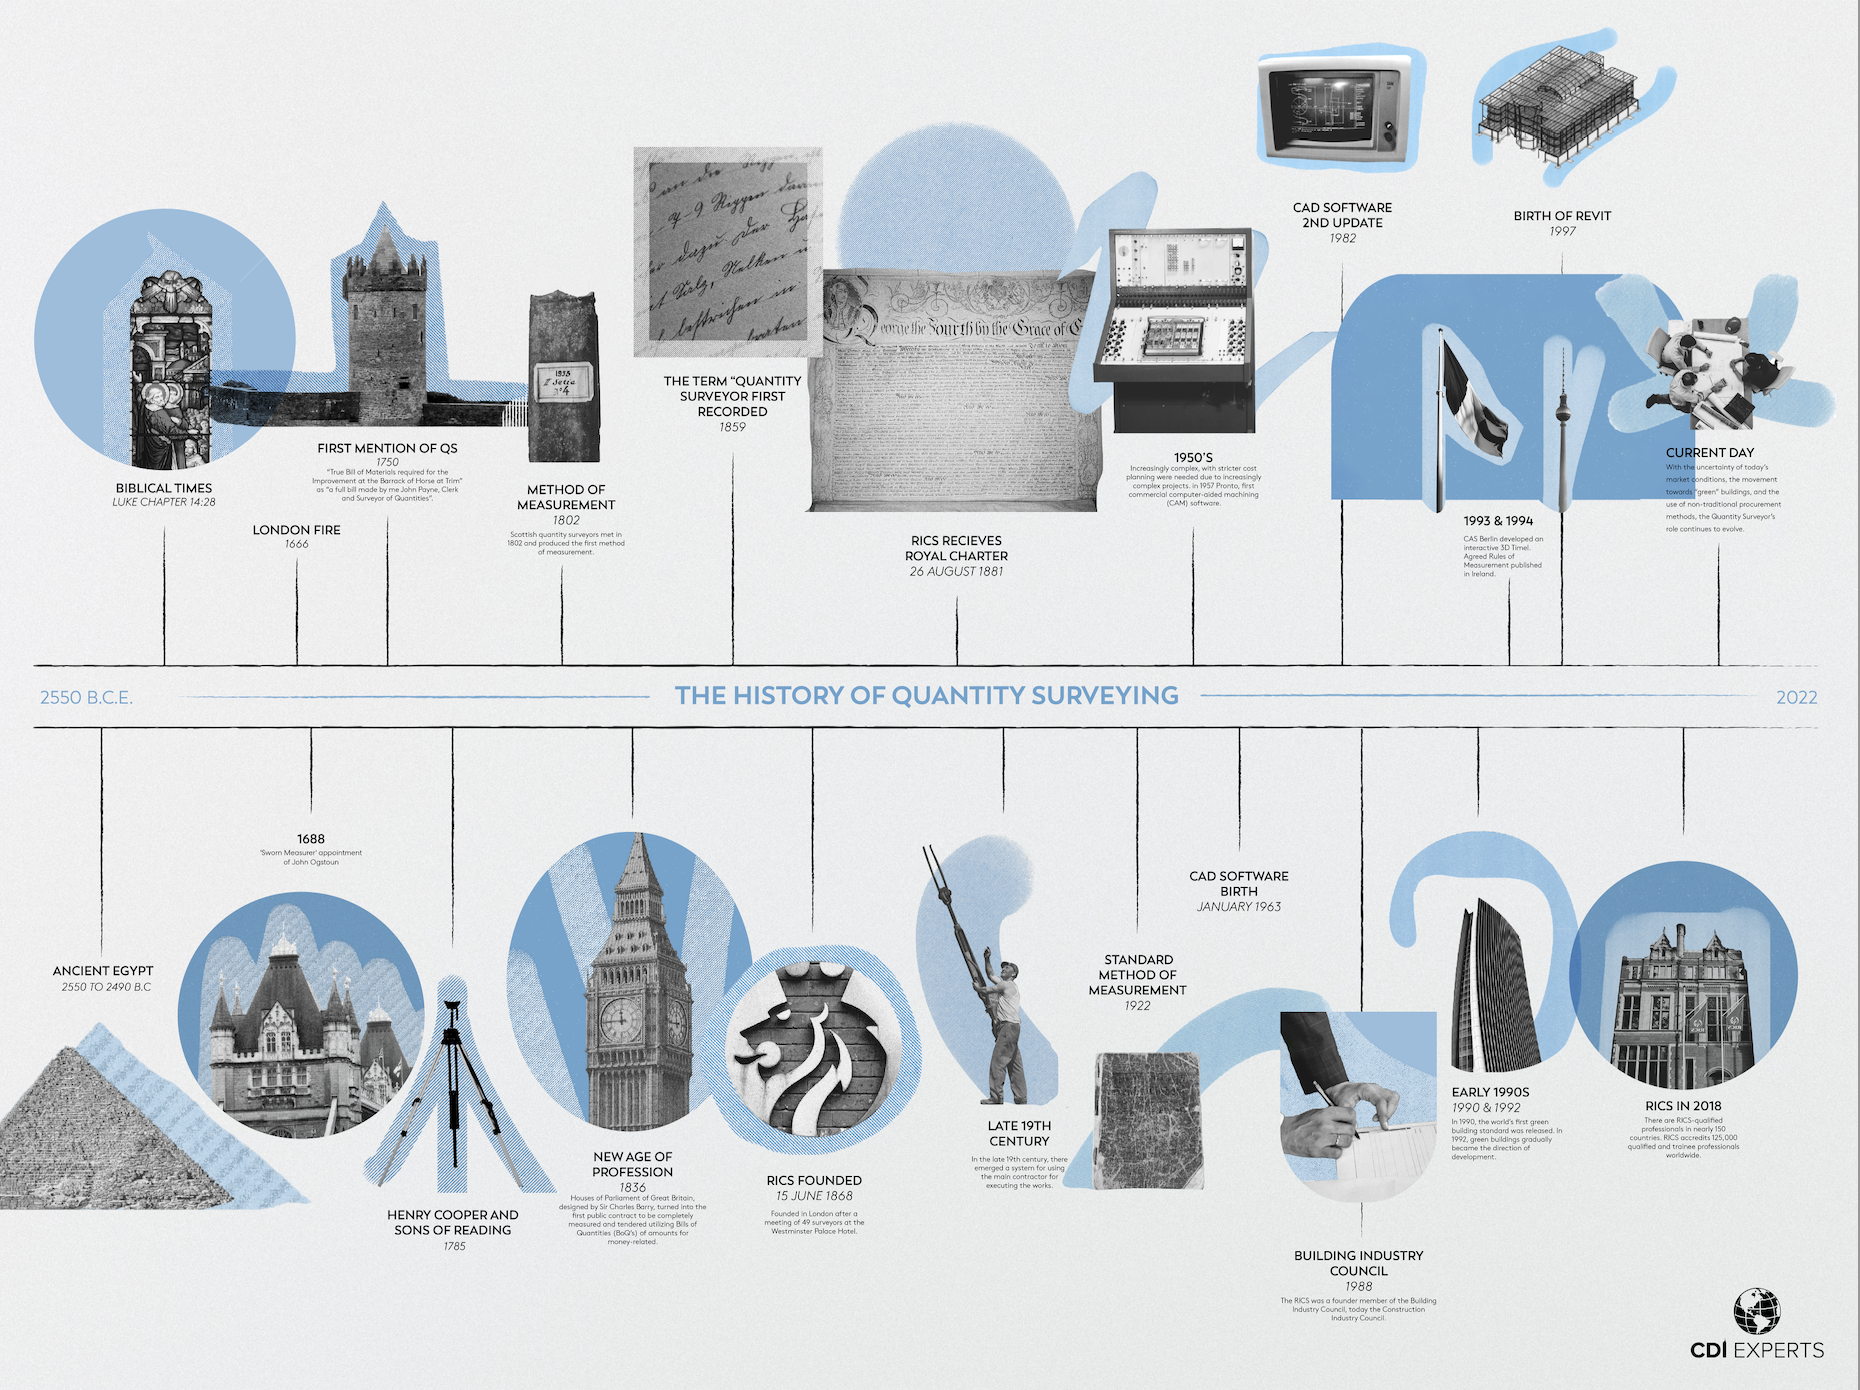 The History of Quantity Surveying Timeline